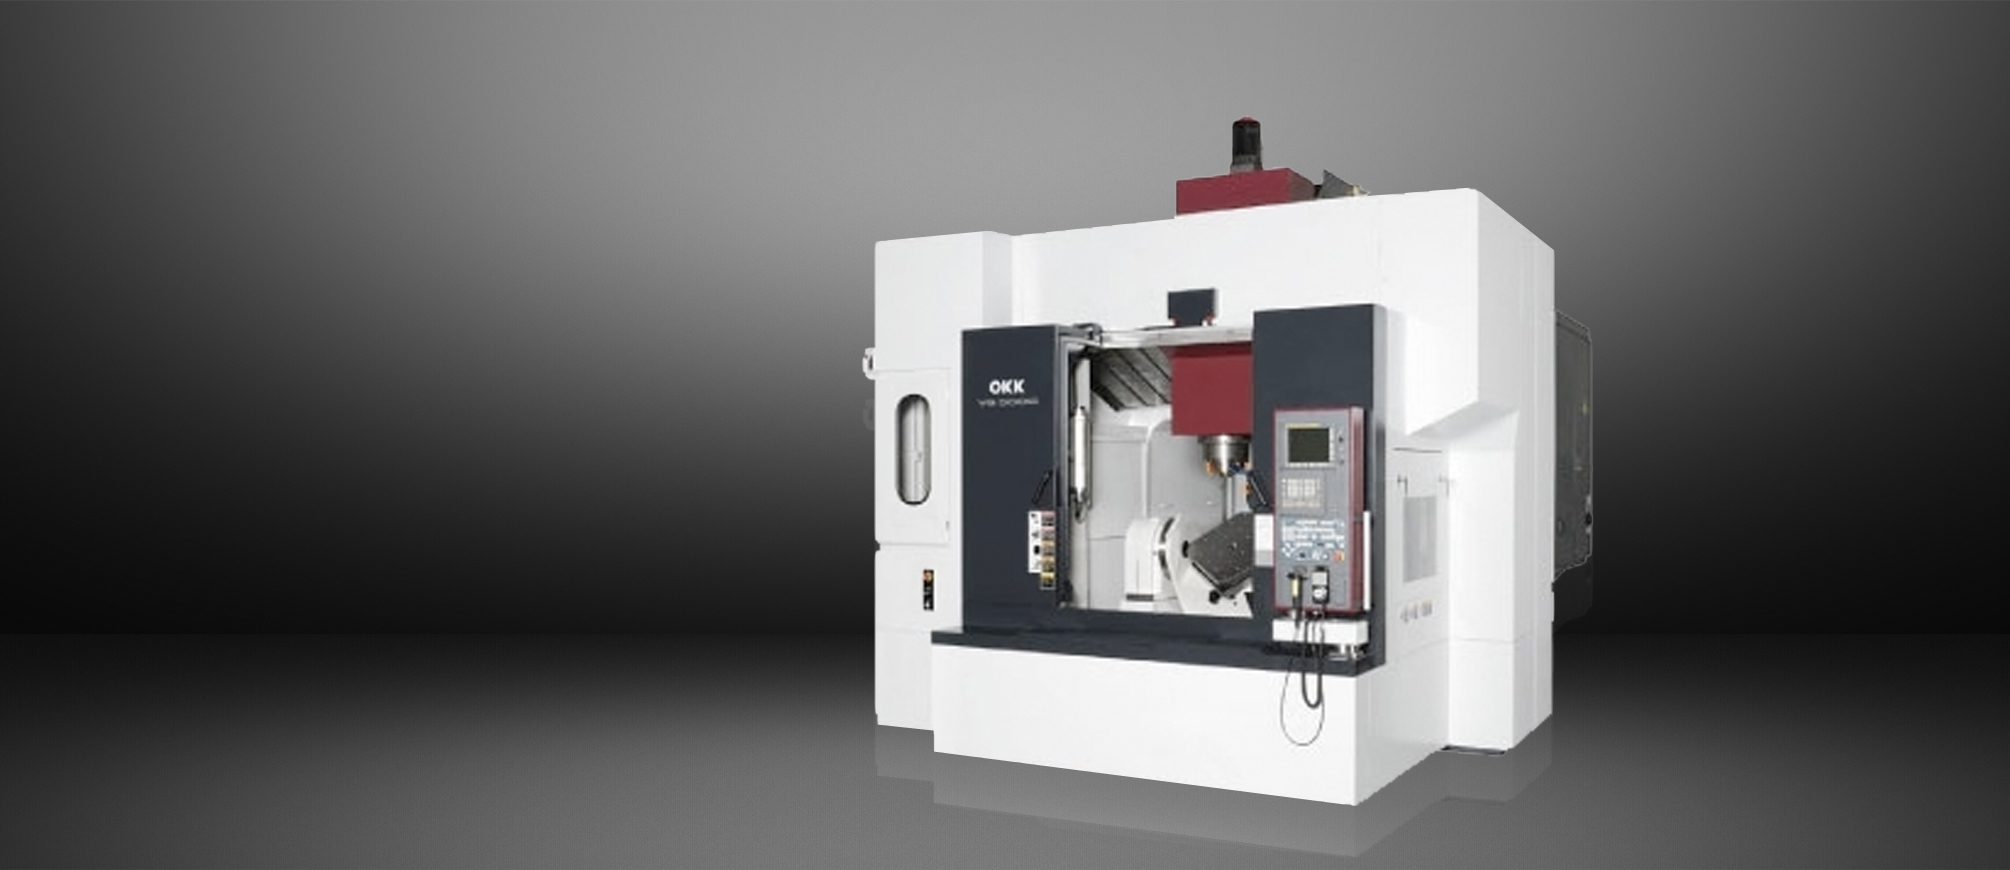 VG-5000 5 Axis Machining Centers